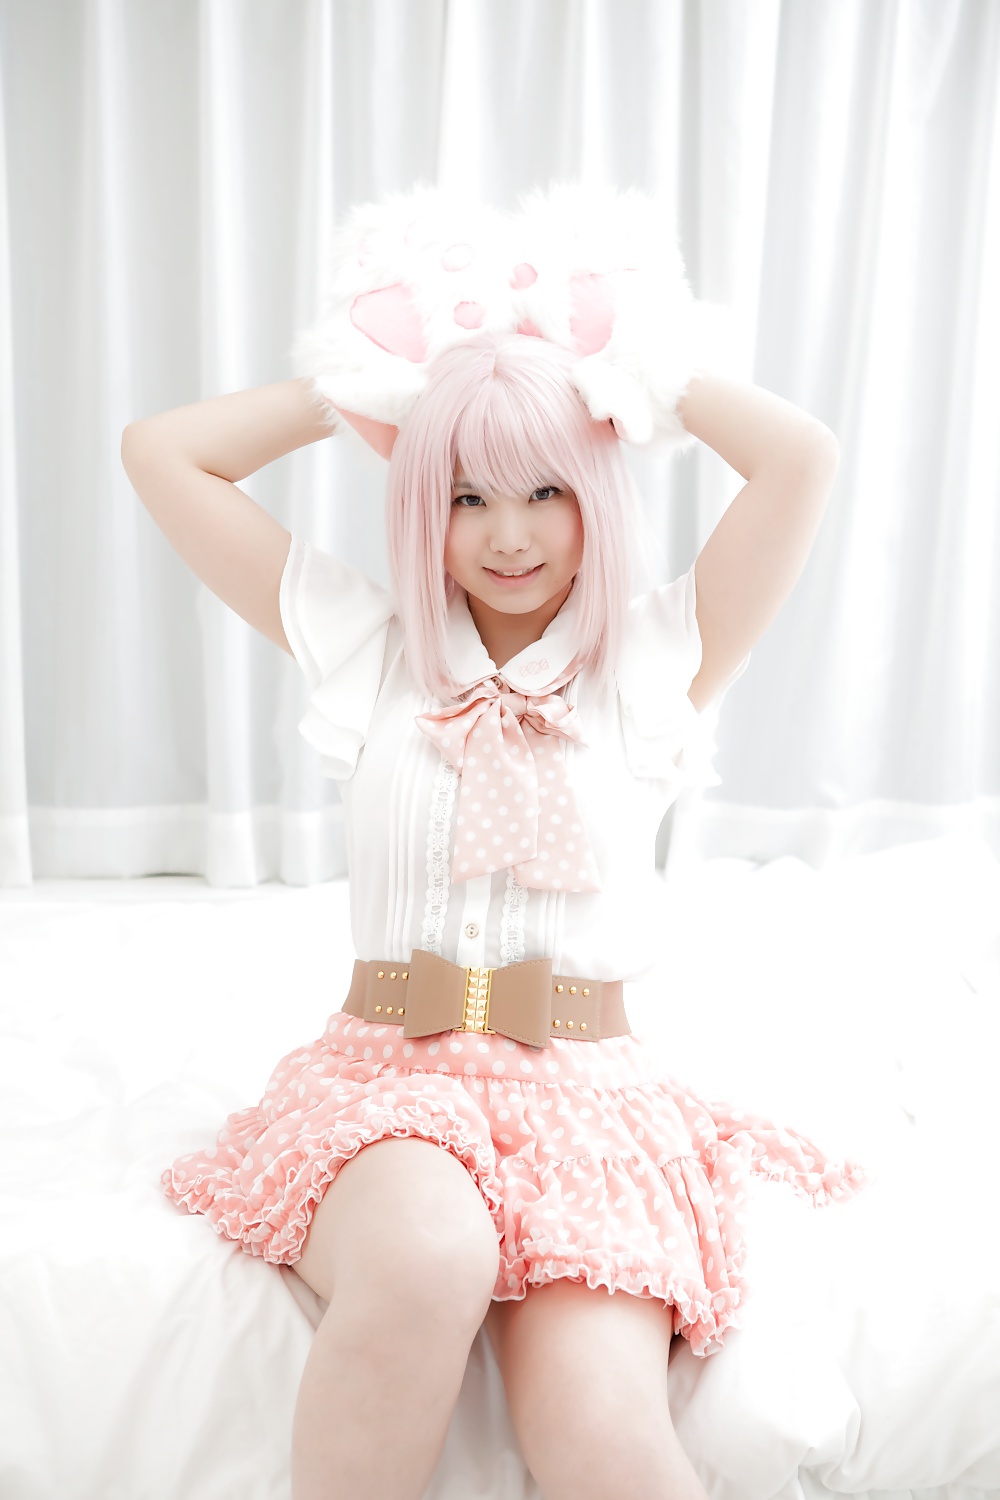 Asiatica cosplay in bianco
 #26558678